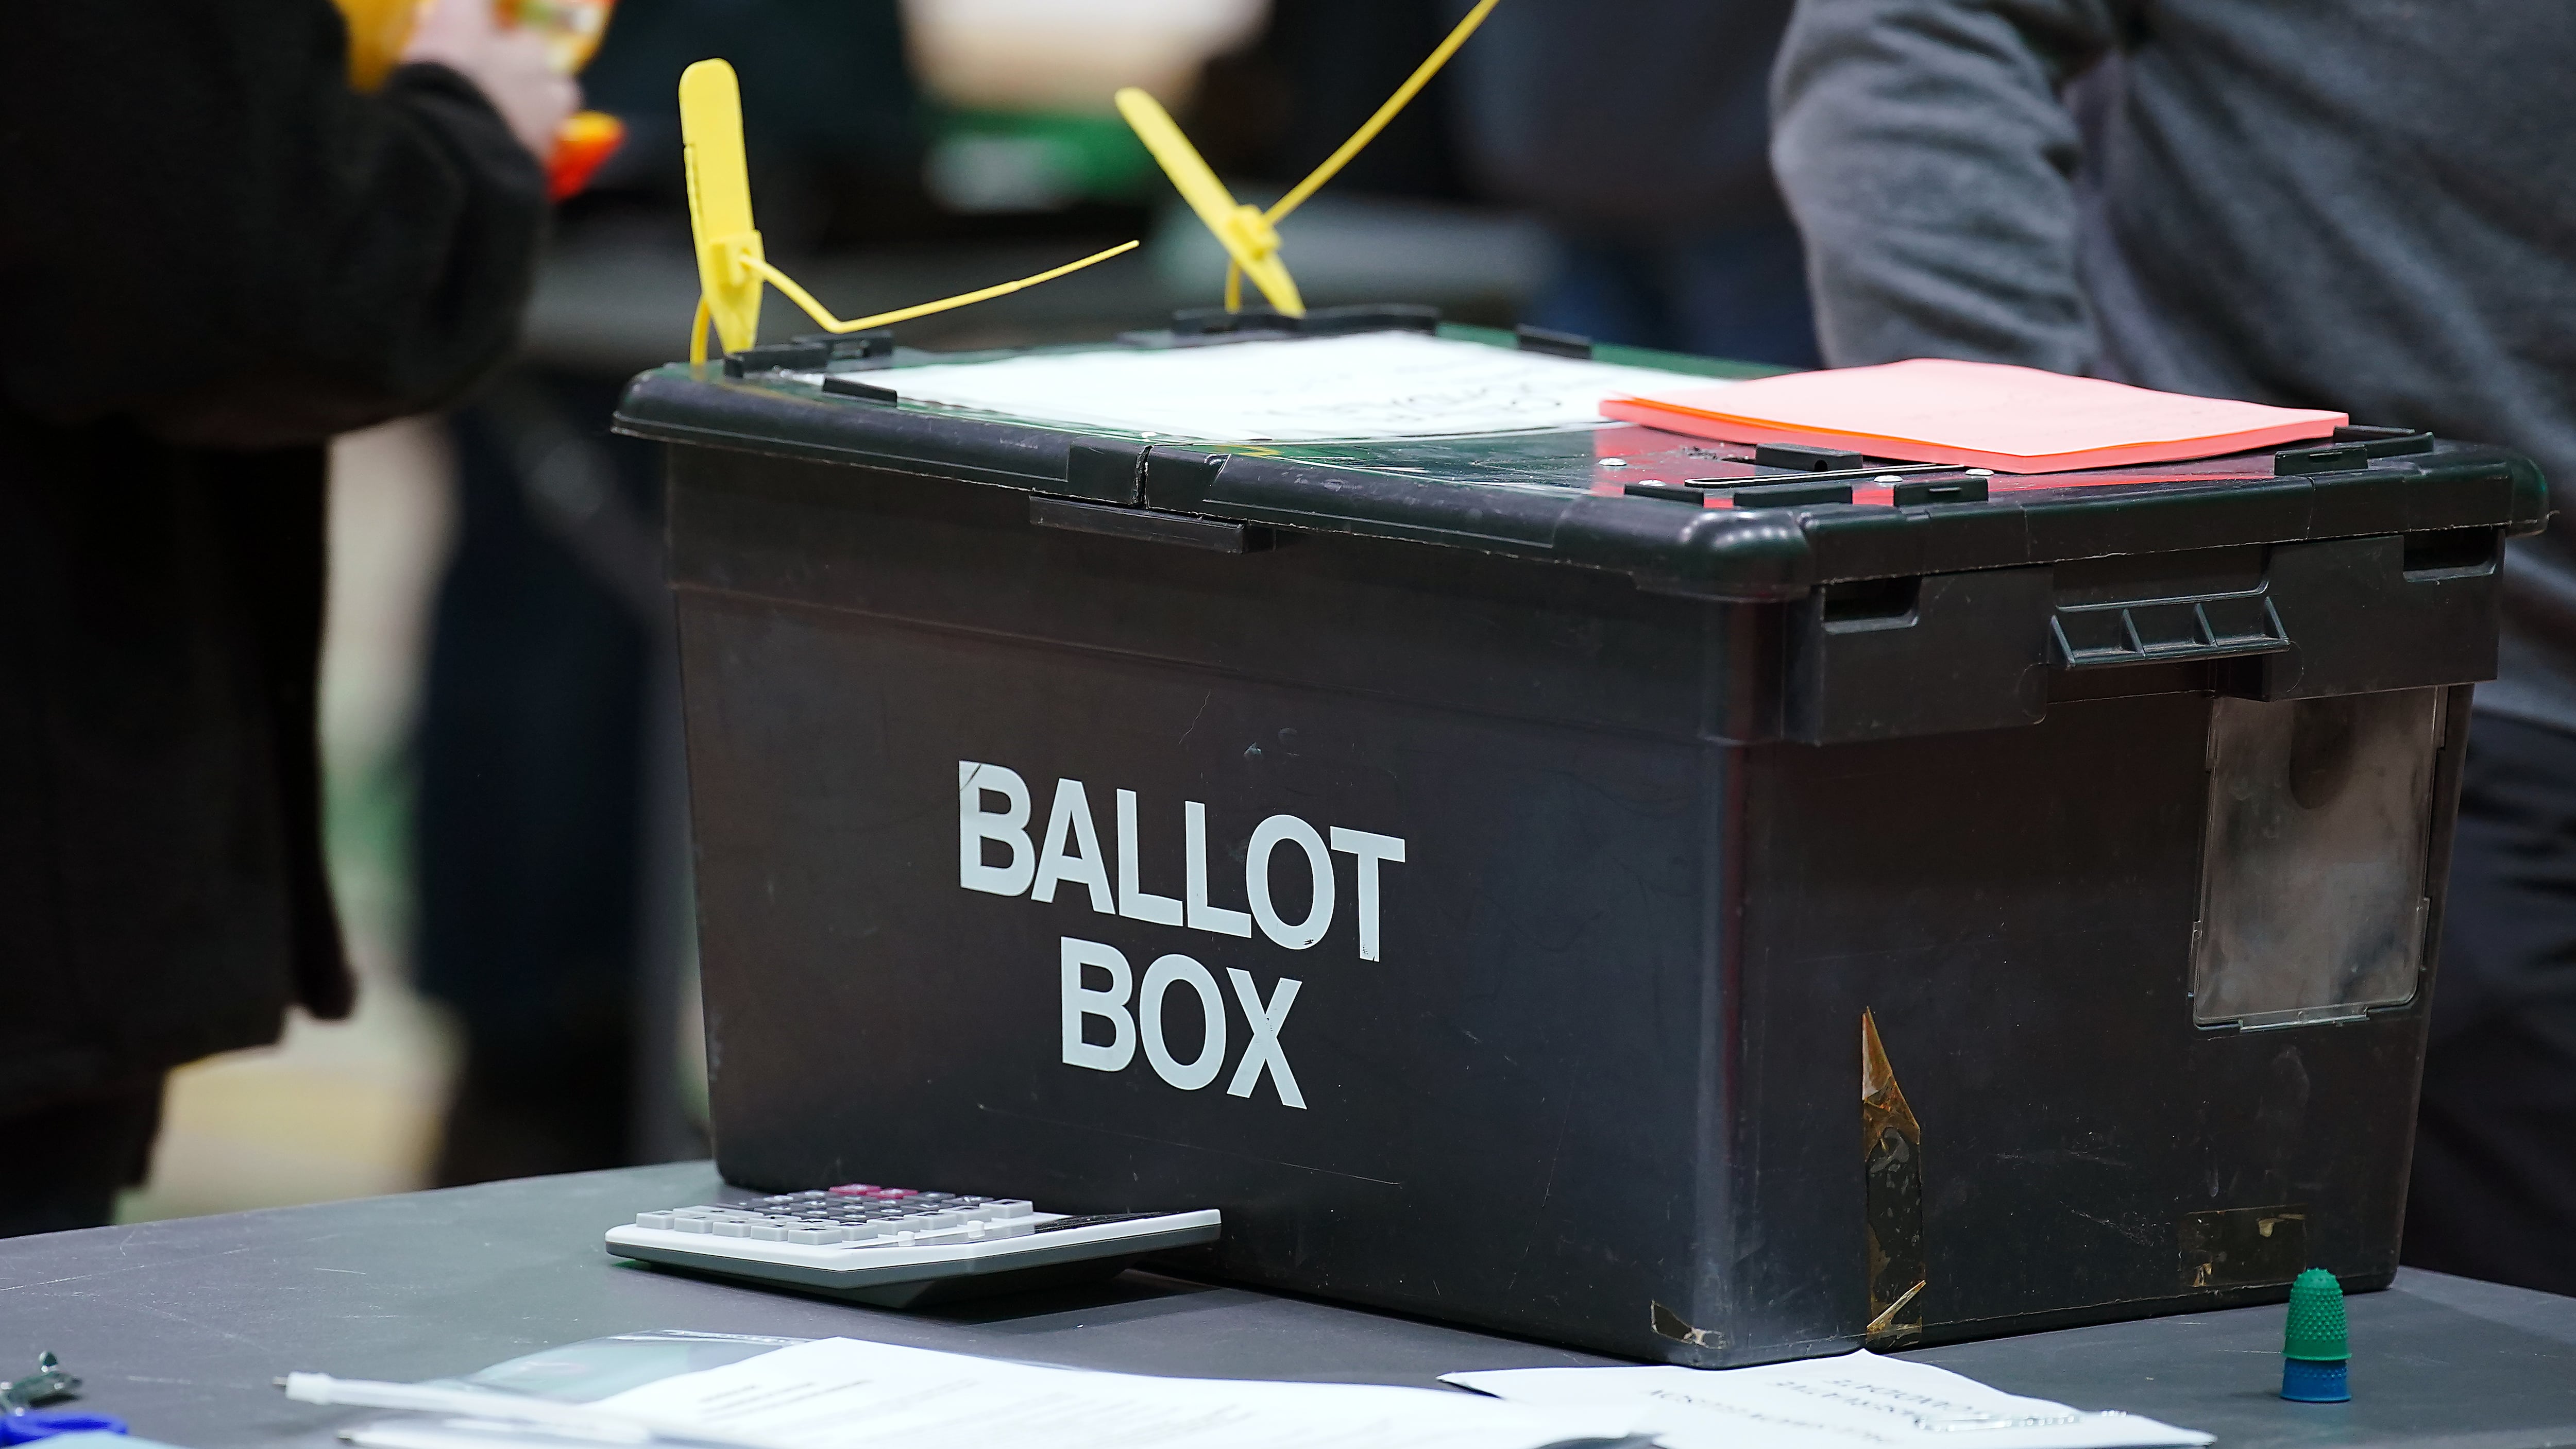 More than 2.7 million applications to vote have been submitted since the General Election was called